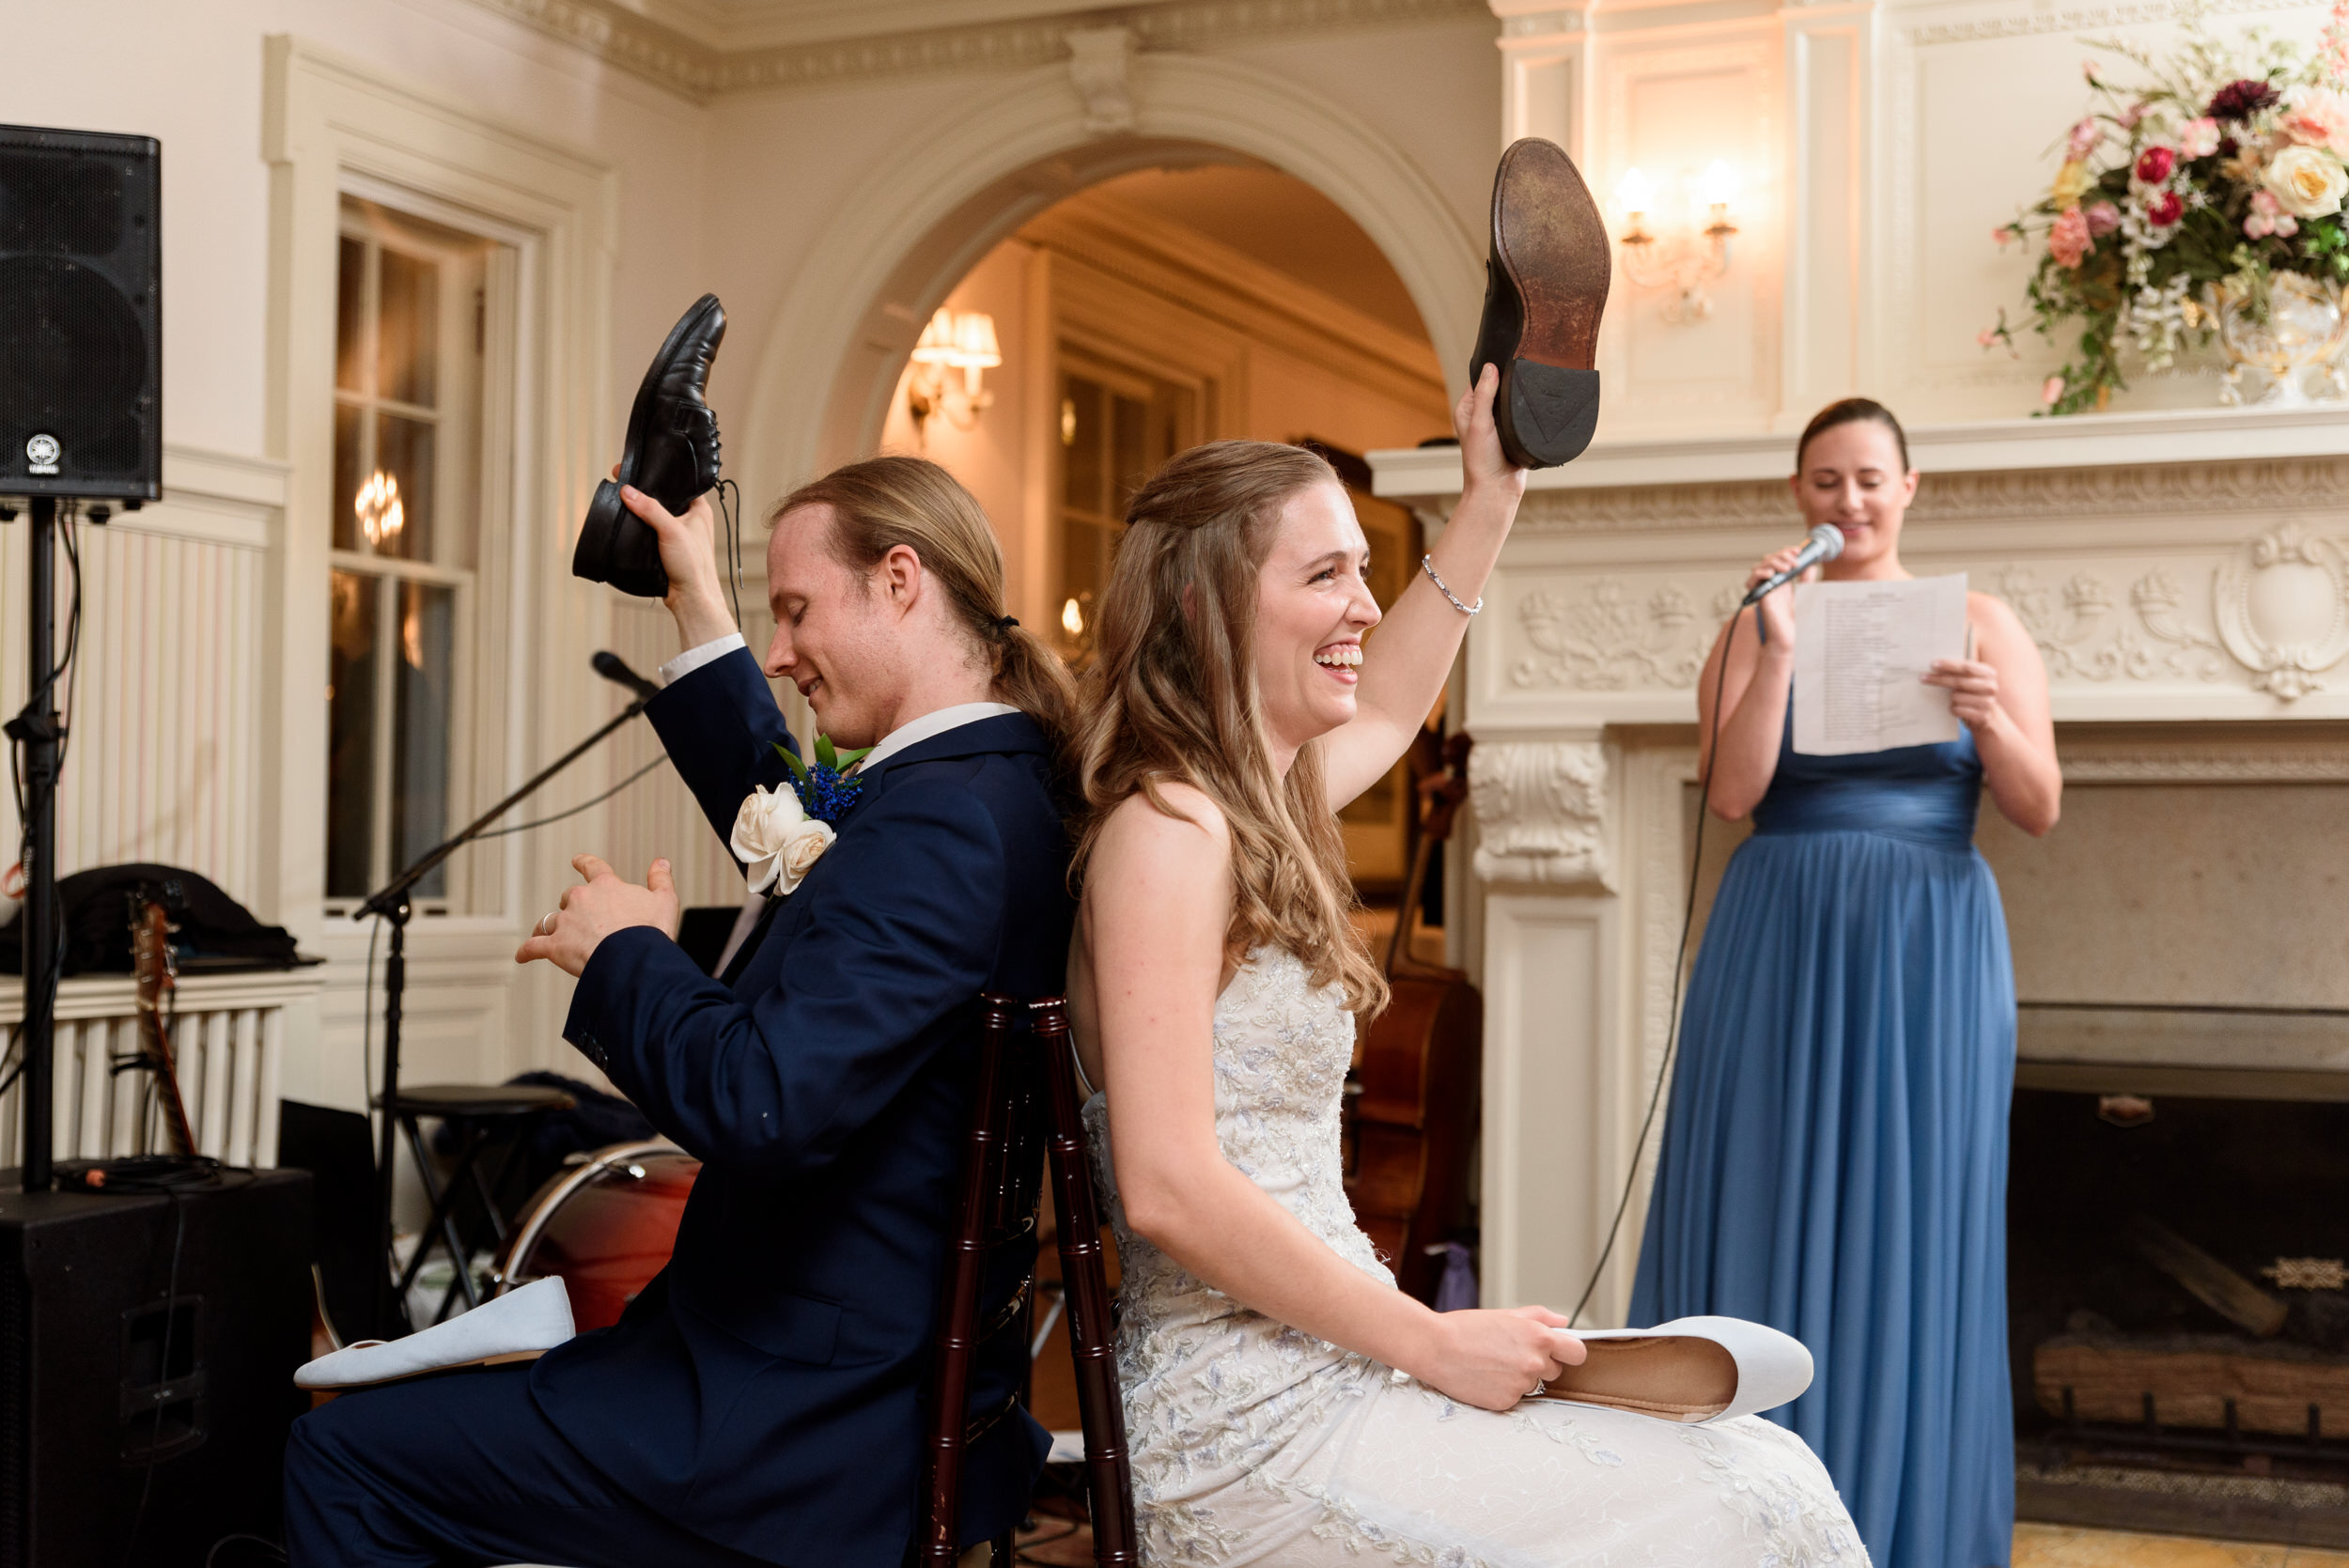 Bride and groom play the shoe game at Liriodendron Mansion wedding reception